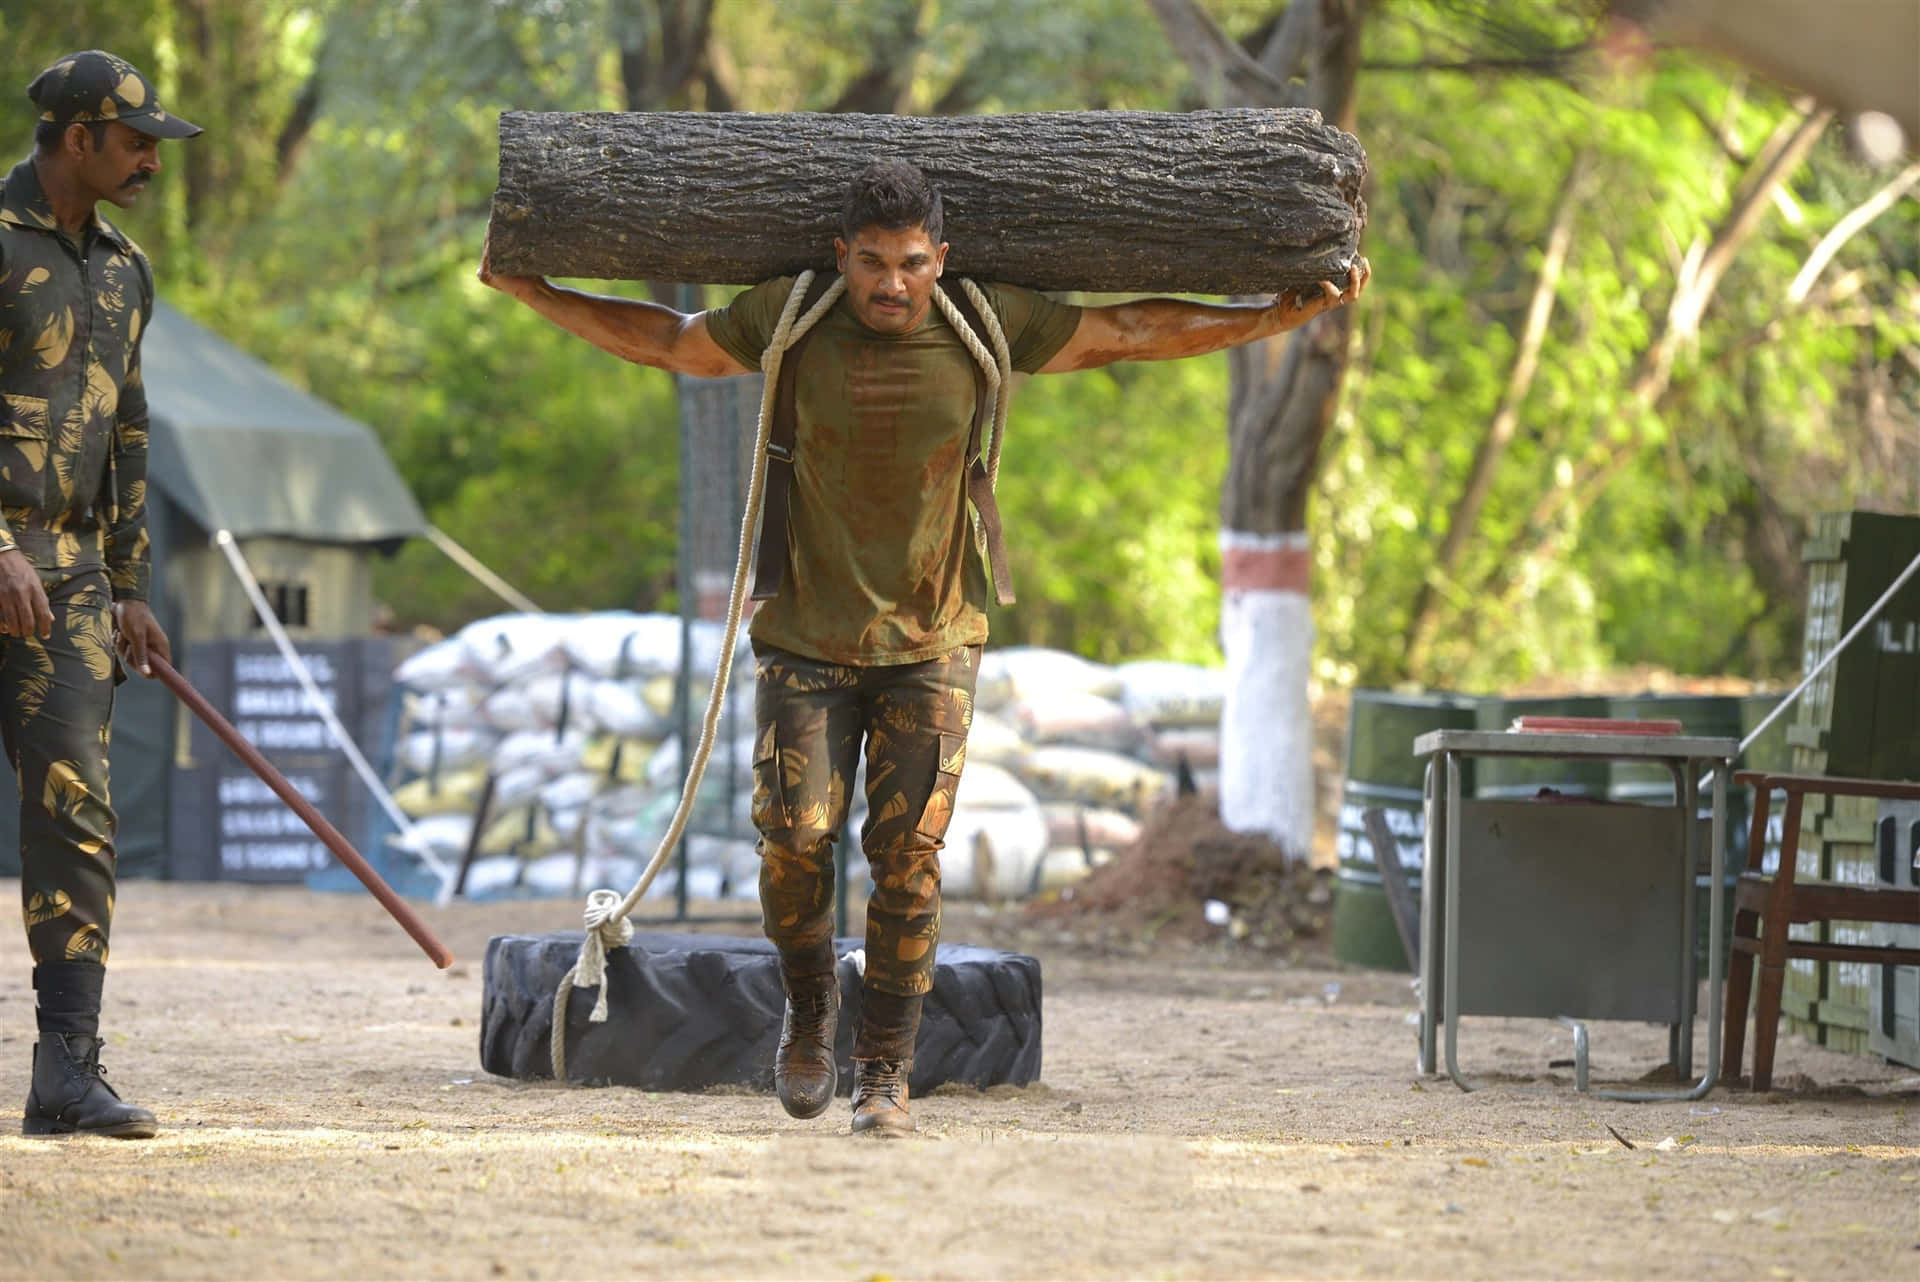 Surya, The Determined Soldier - A Still From The Movie 'surya The Soldier' Featuring Allu Arjun